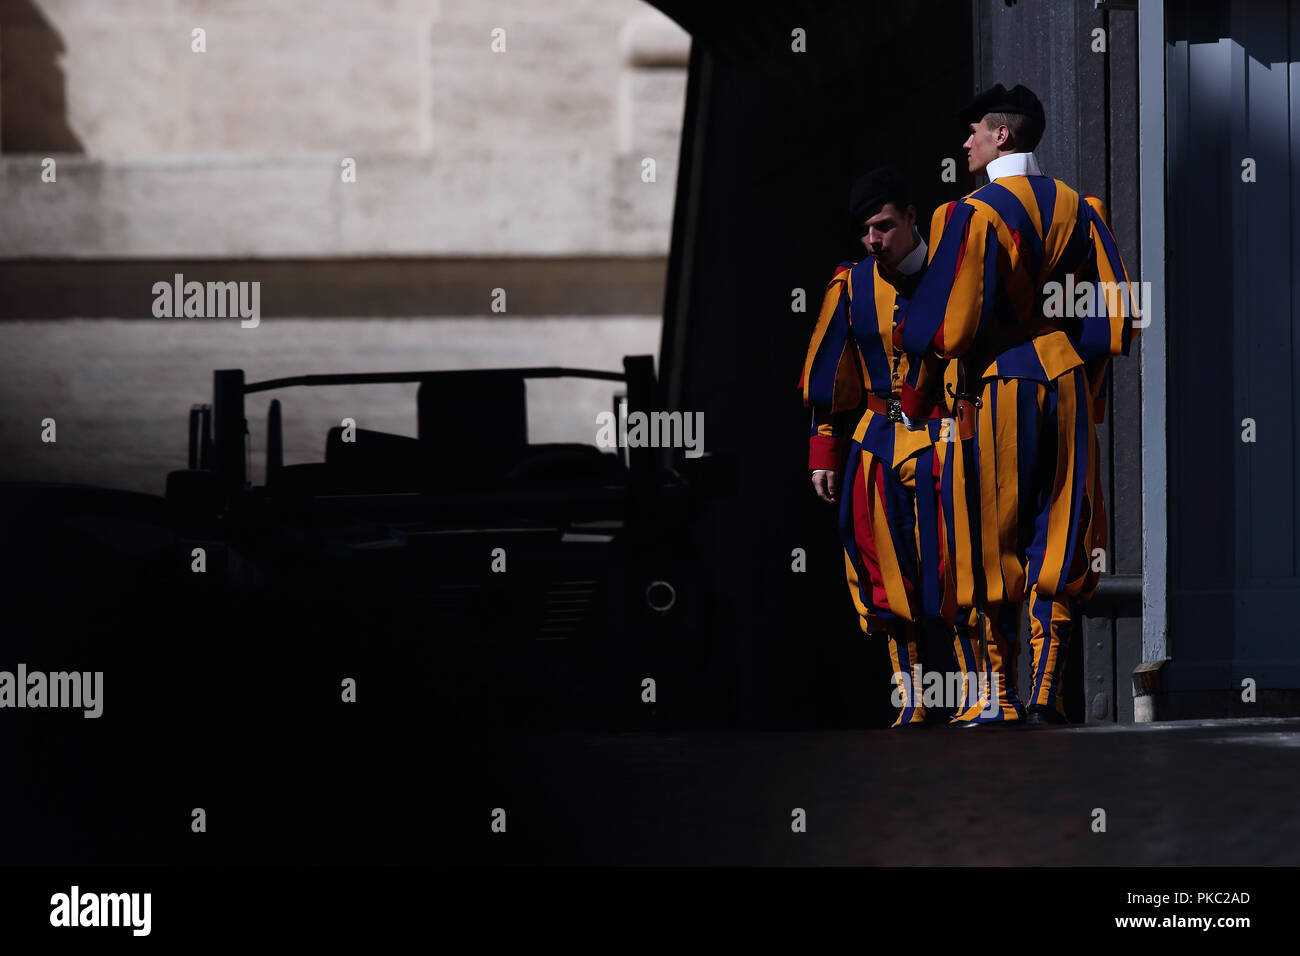 September 12, 2018 - Vatican City (Holy See) Swiss guards attend the Pope Francis General Audience in St. Peter's Square at the Vatican. Credit: Evandro Inetti/ZUMA Wire/Alamy Live News Stock Photo